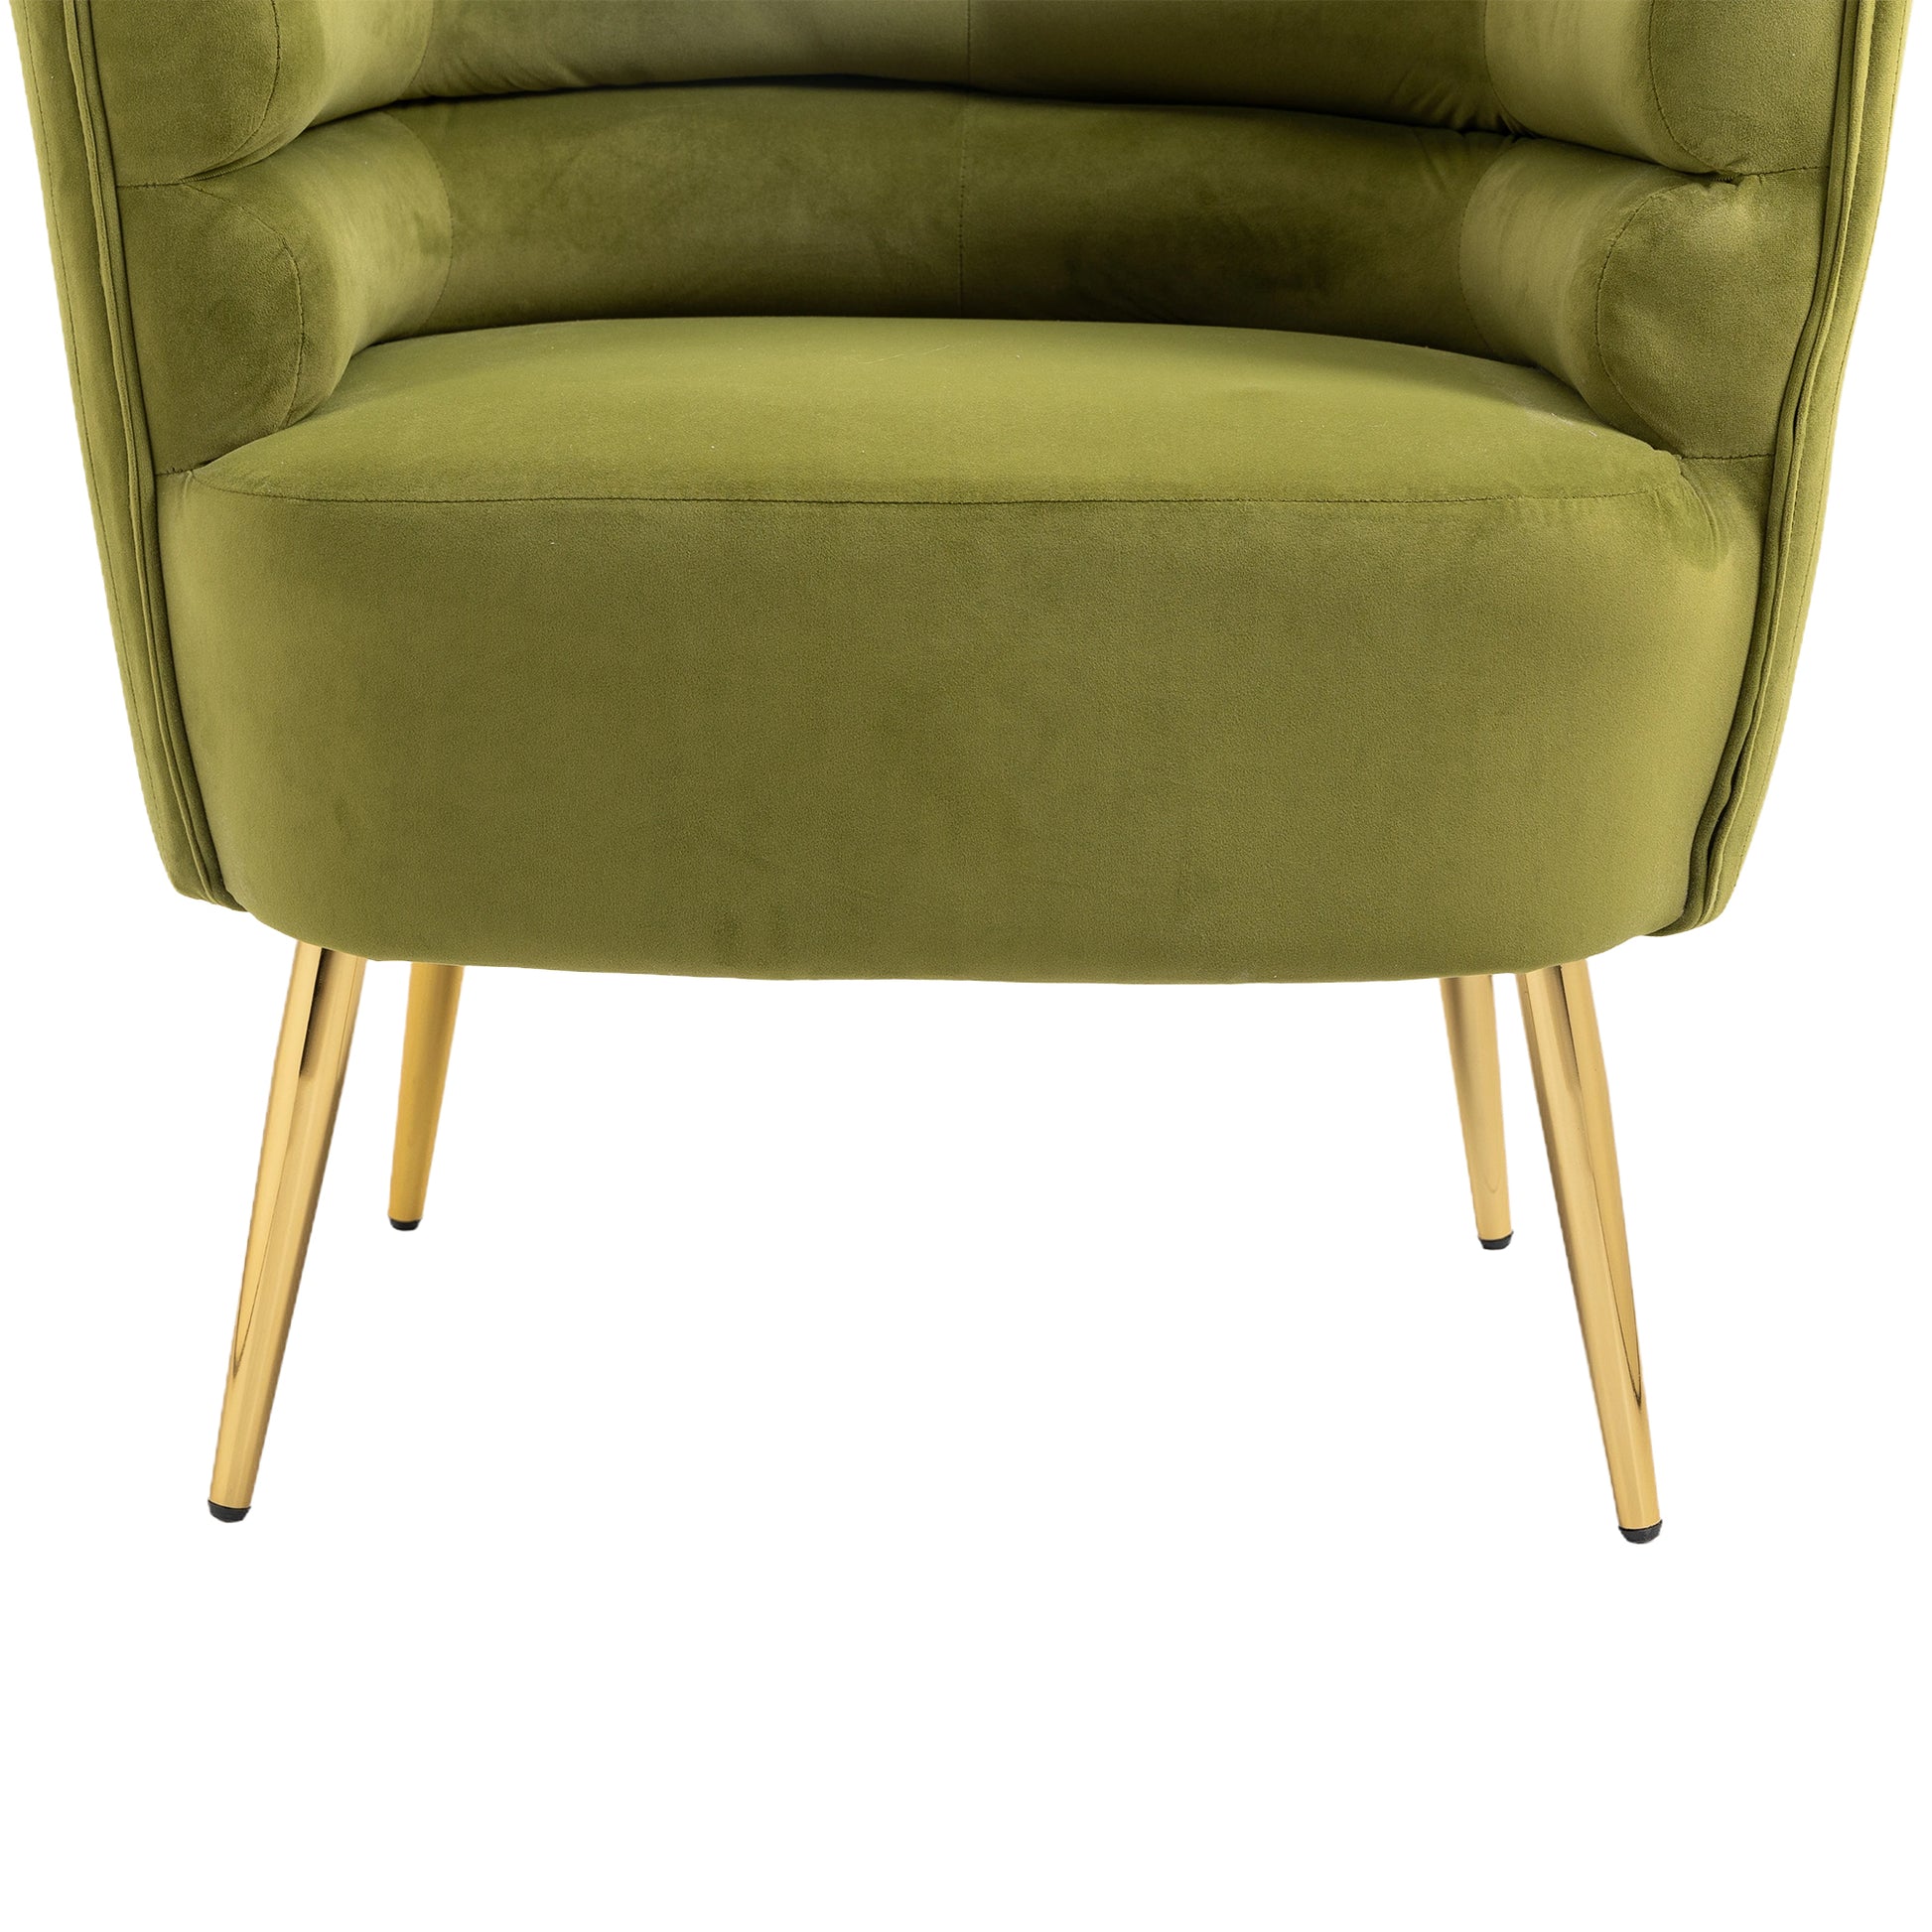 COOLMORE Accent  Chair  ,leisure single chair  with Golden  feet - Enova Luxe Home Store